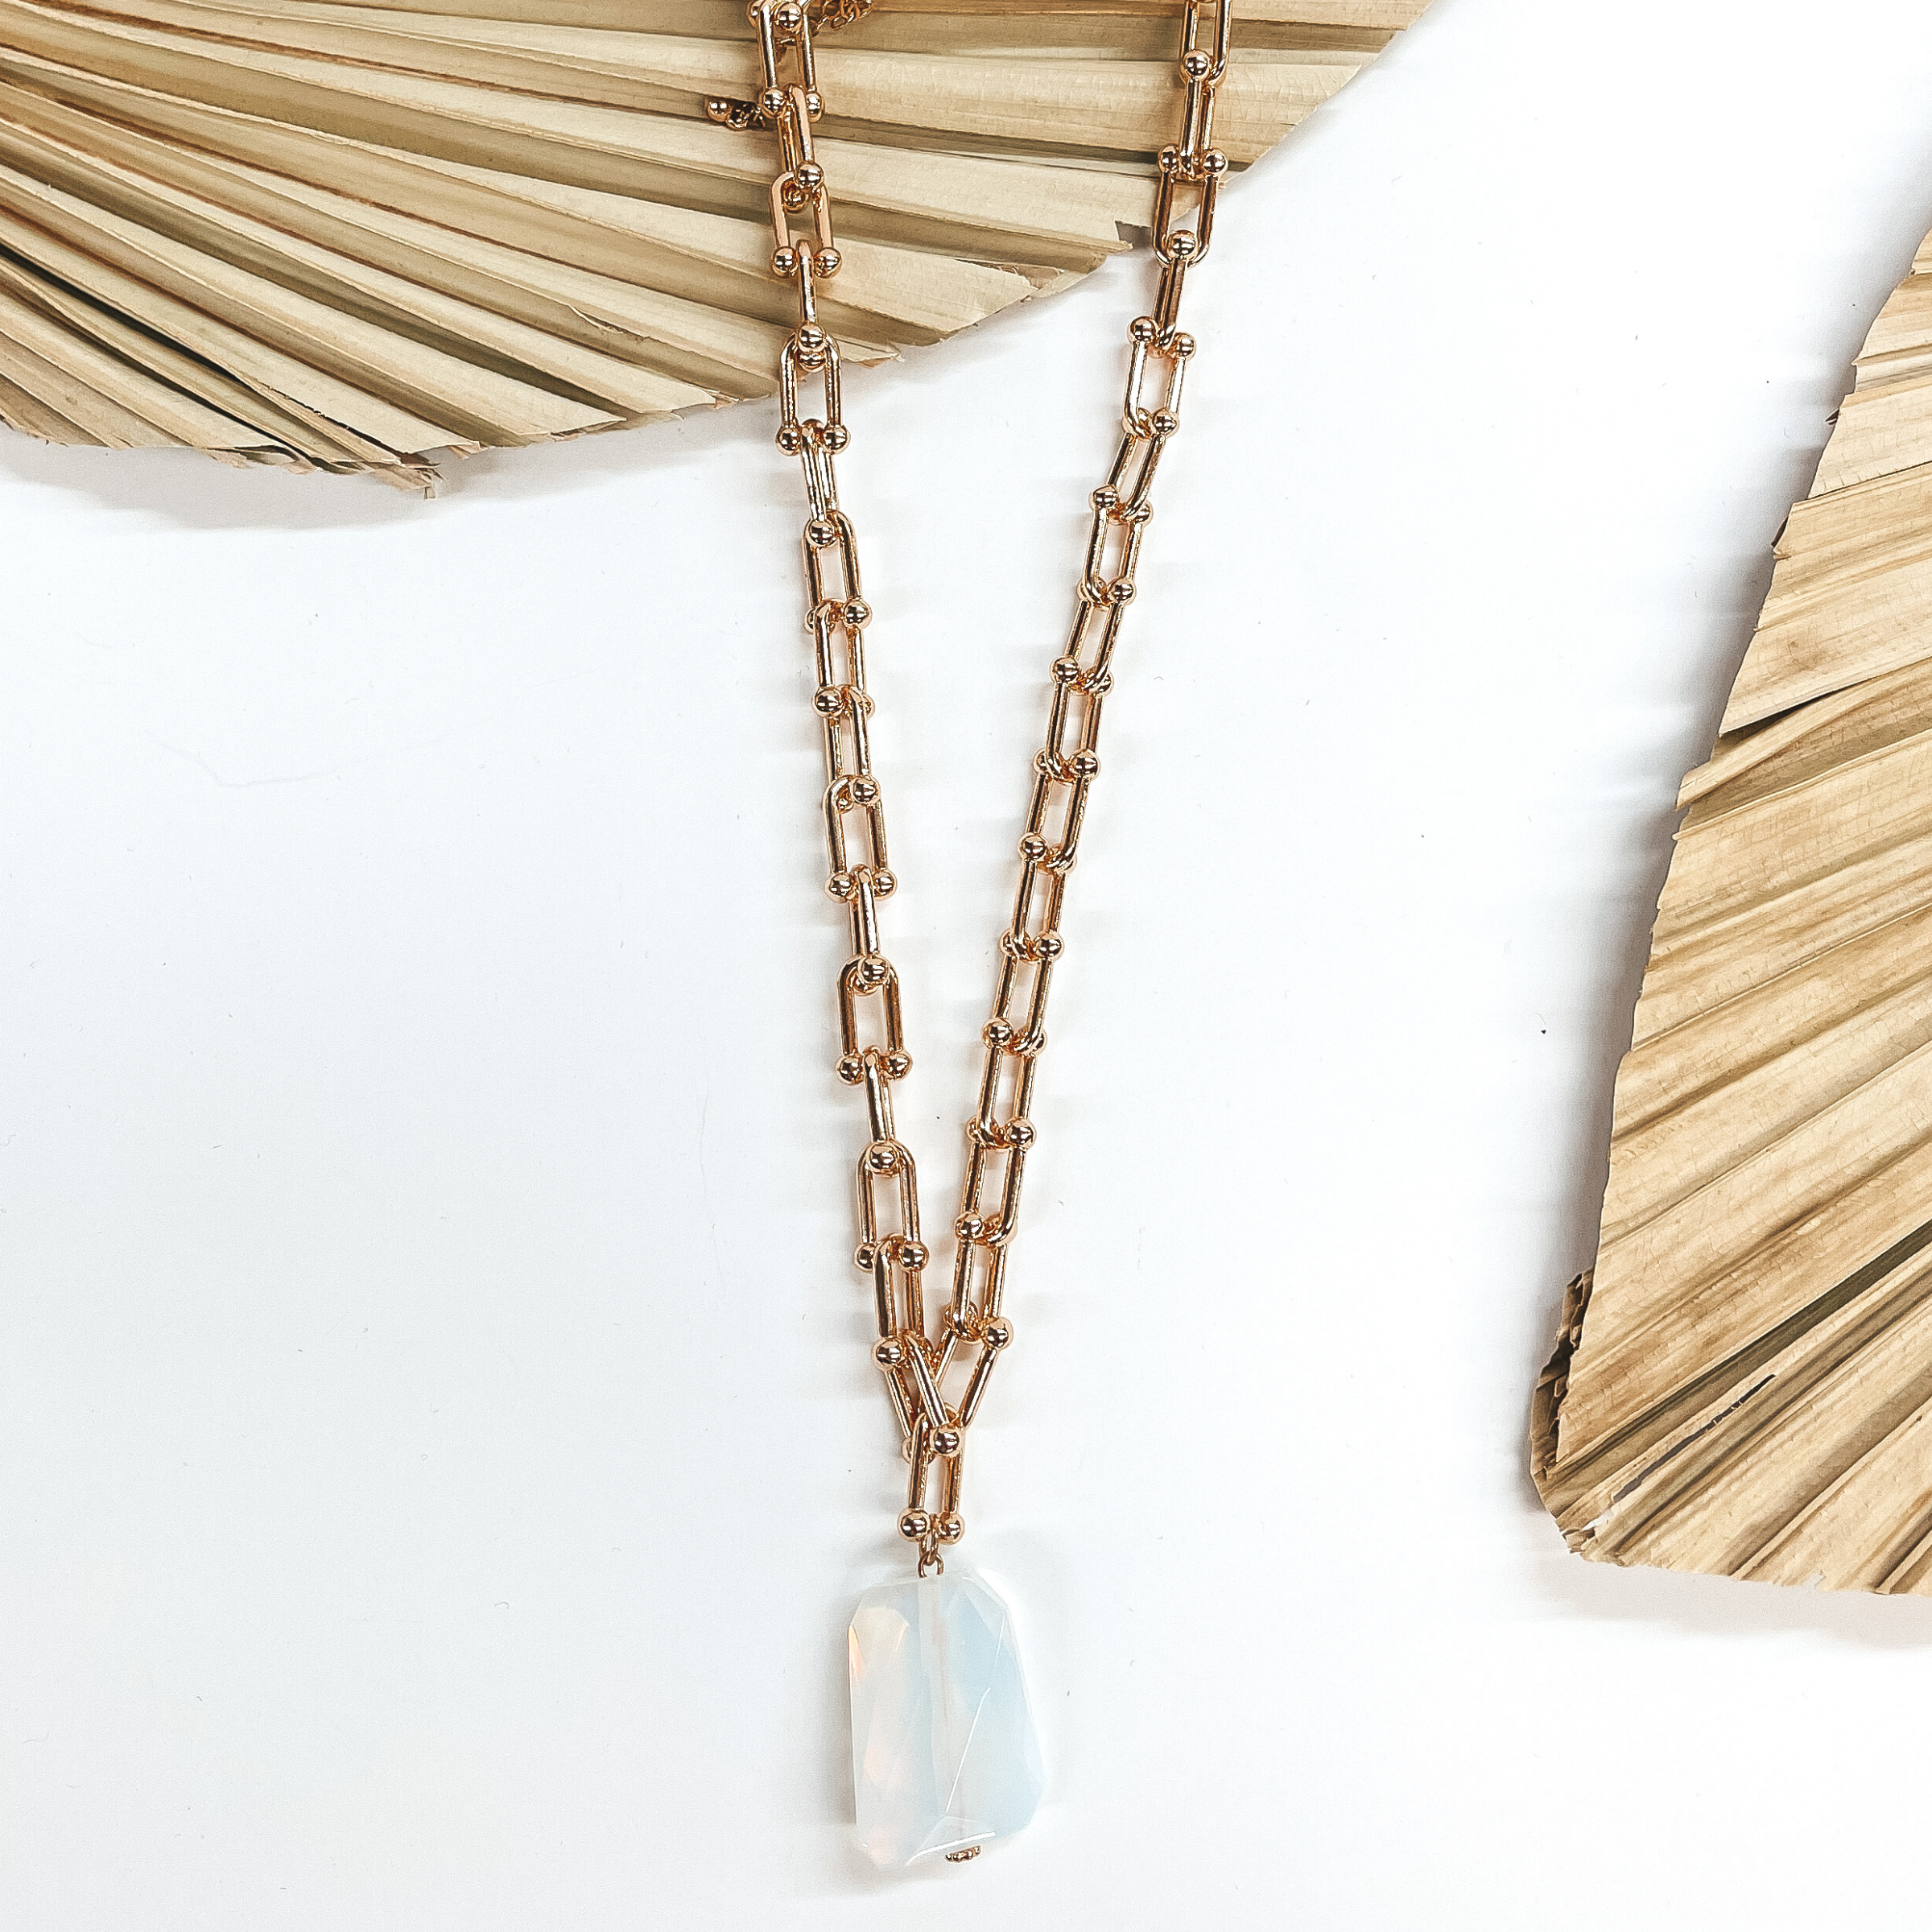 Gold thick link chain necklace with a big opal  iridescent stone pendant in the center. The necklace is taken laying on a dried up palm leaf and white background, with  another dried up palm leaf in the side as decor.